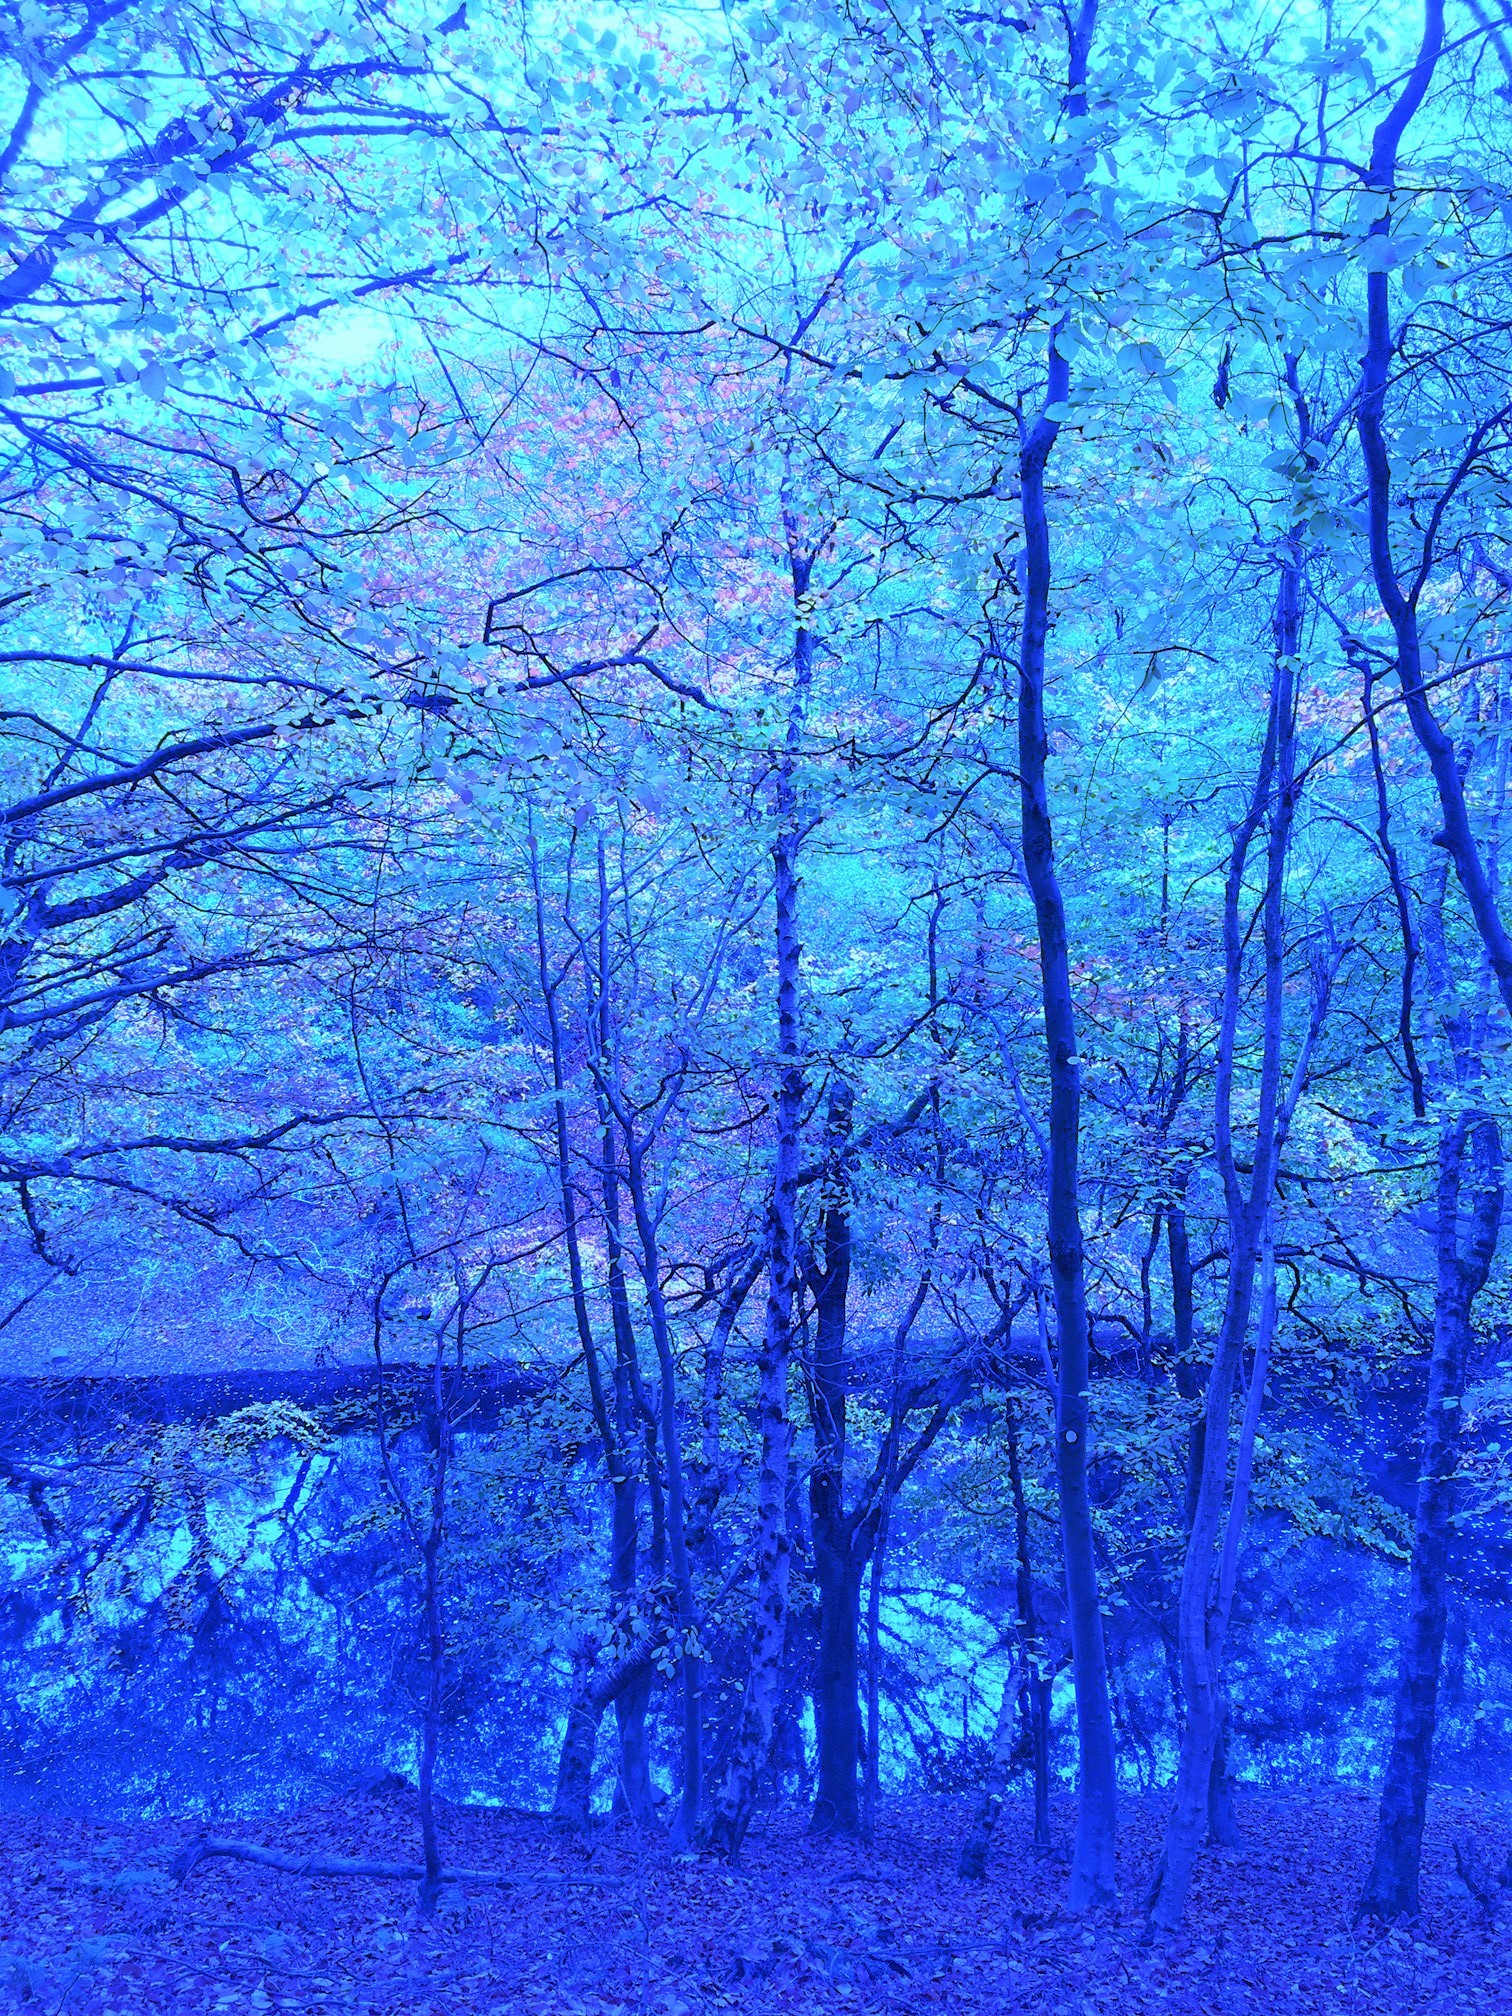 A forest with a blue tint.